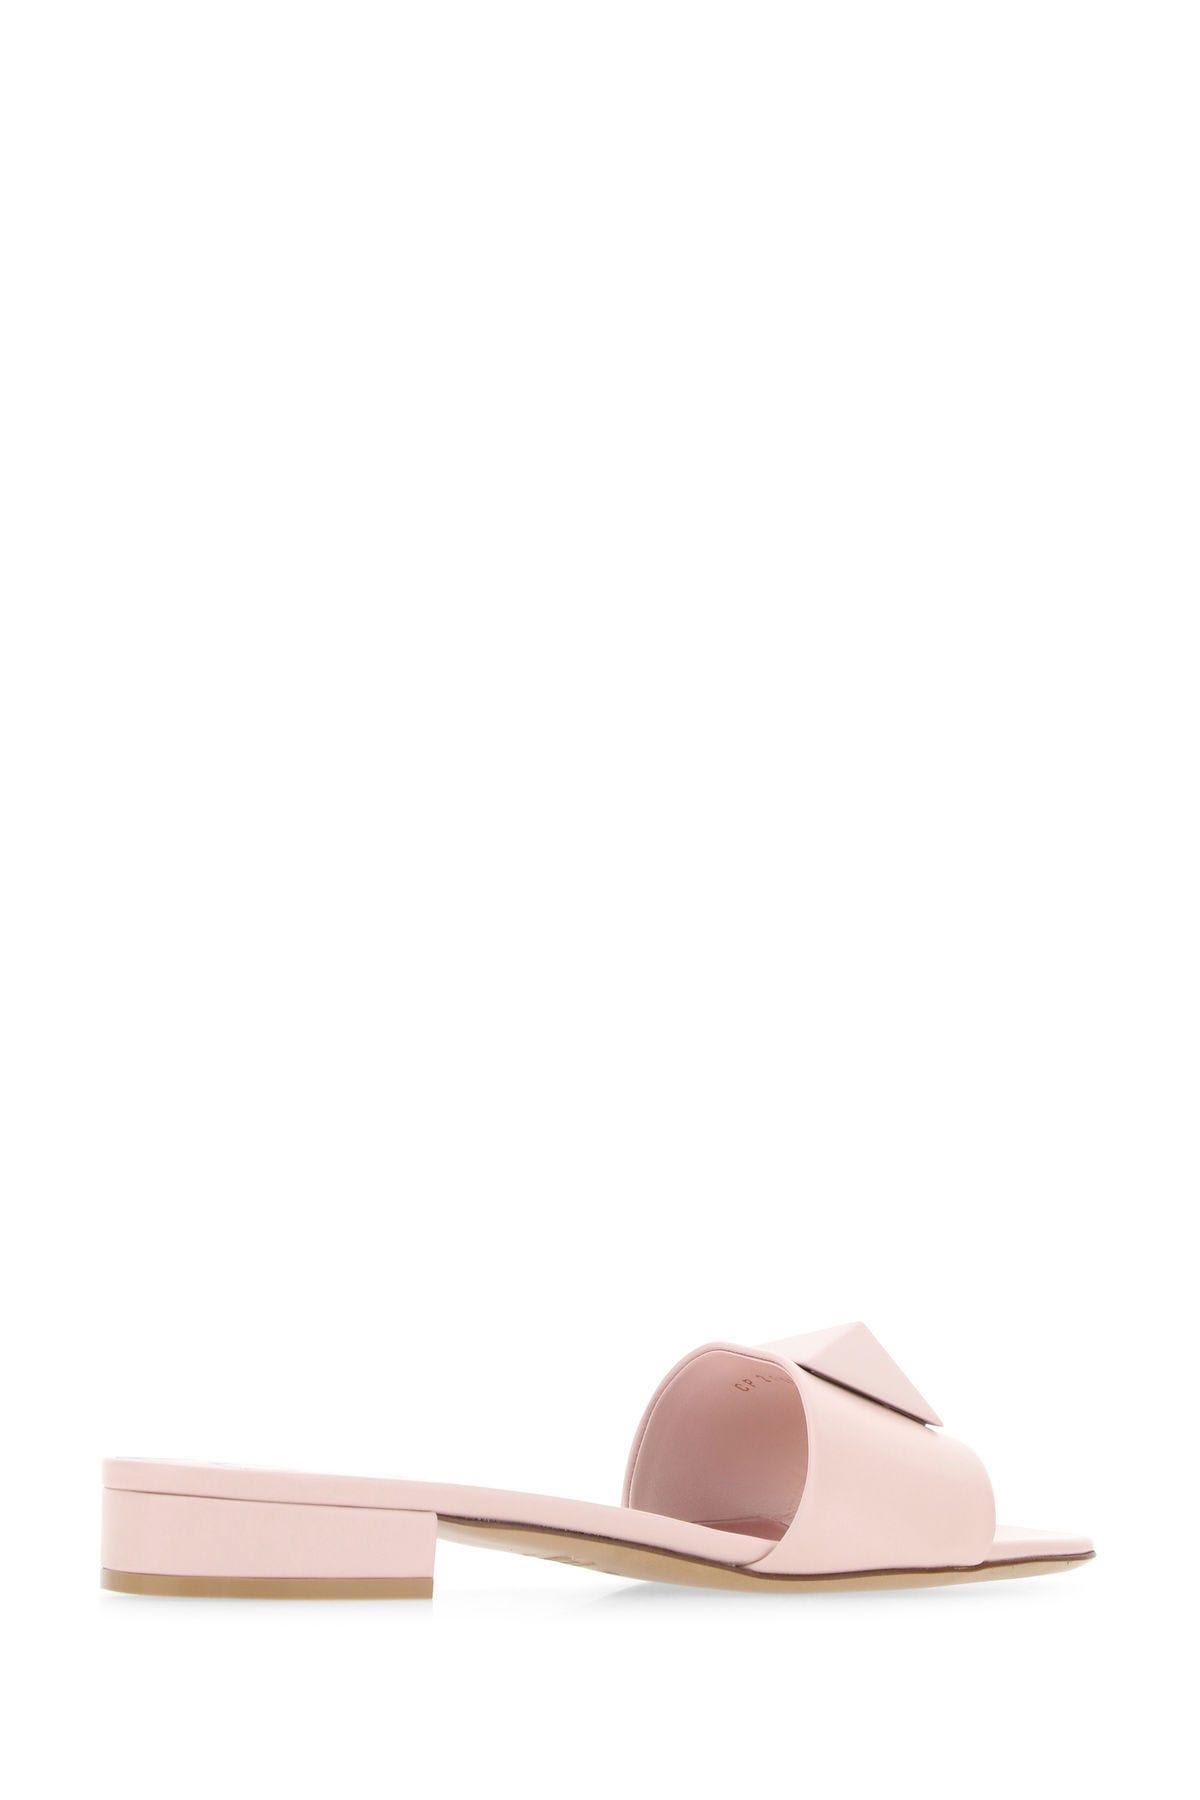 Shop Valentino Pastel Pink Leather One Stud Slippers